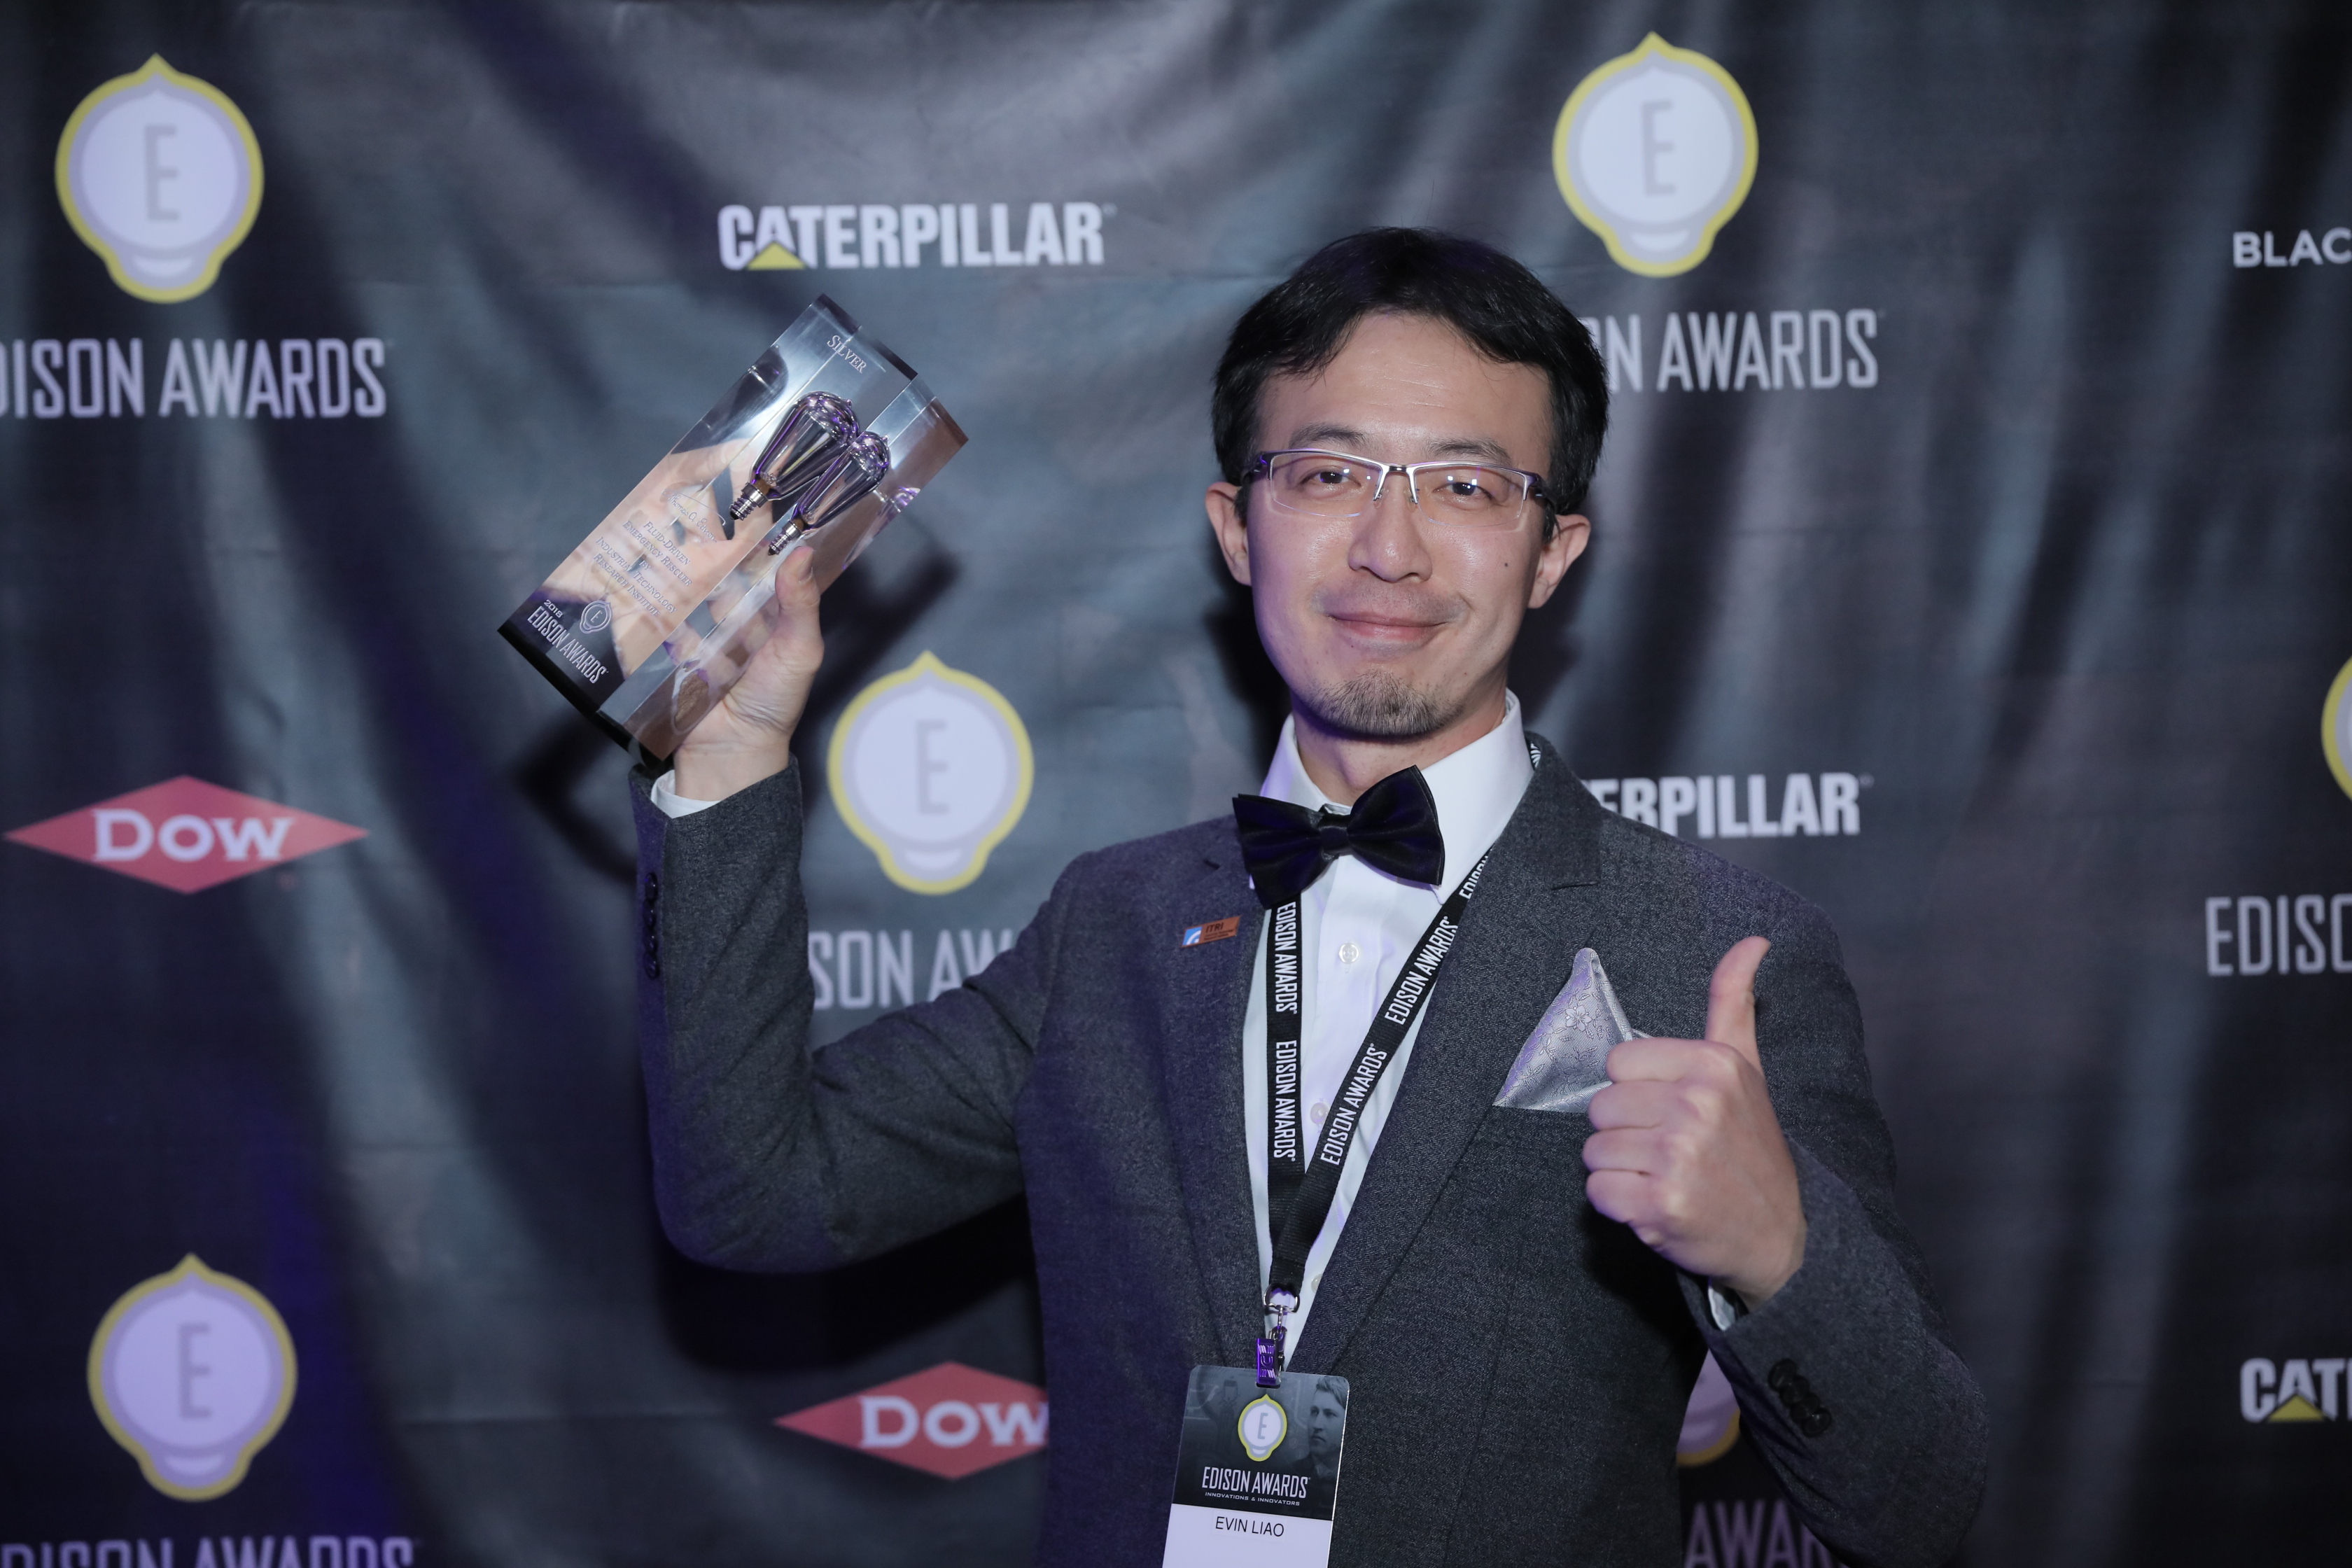 Dr. Jung-Huang Liao, Manager of ITRI’s Green Energy and Environment Research Laboratories, received Silver in the Applied Technology/Commercial Safety category at 2018 Edison Awards™ with the Fluid-Driven Emergency Rescuer (FDER) technology.